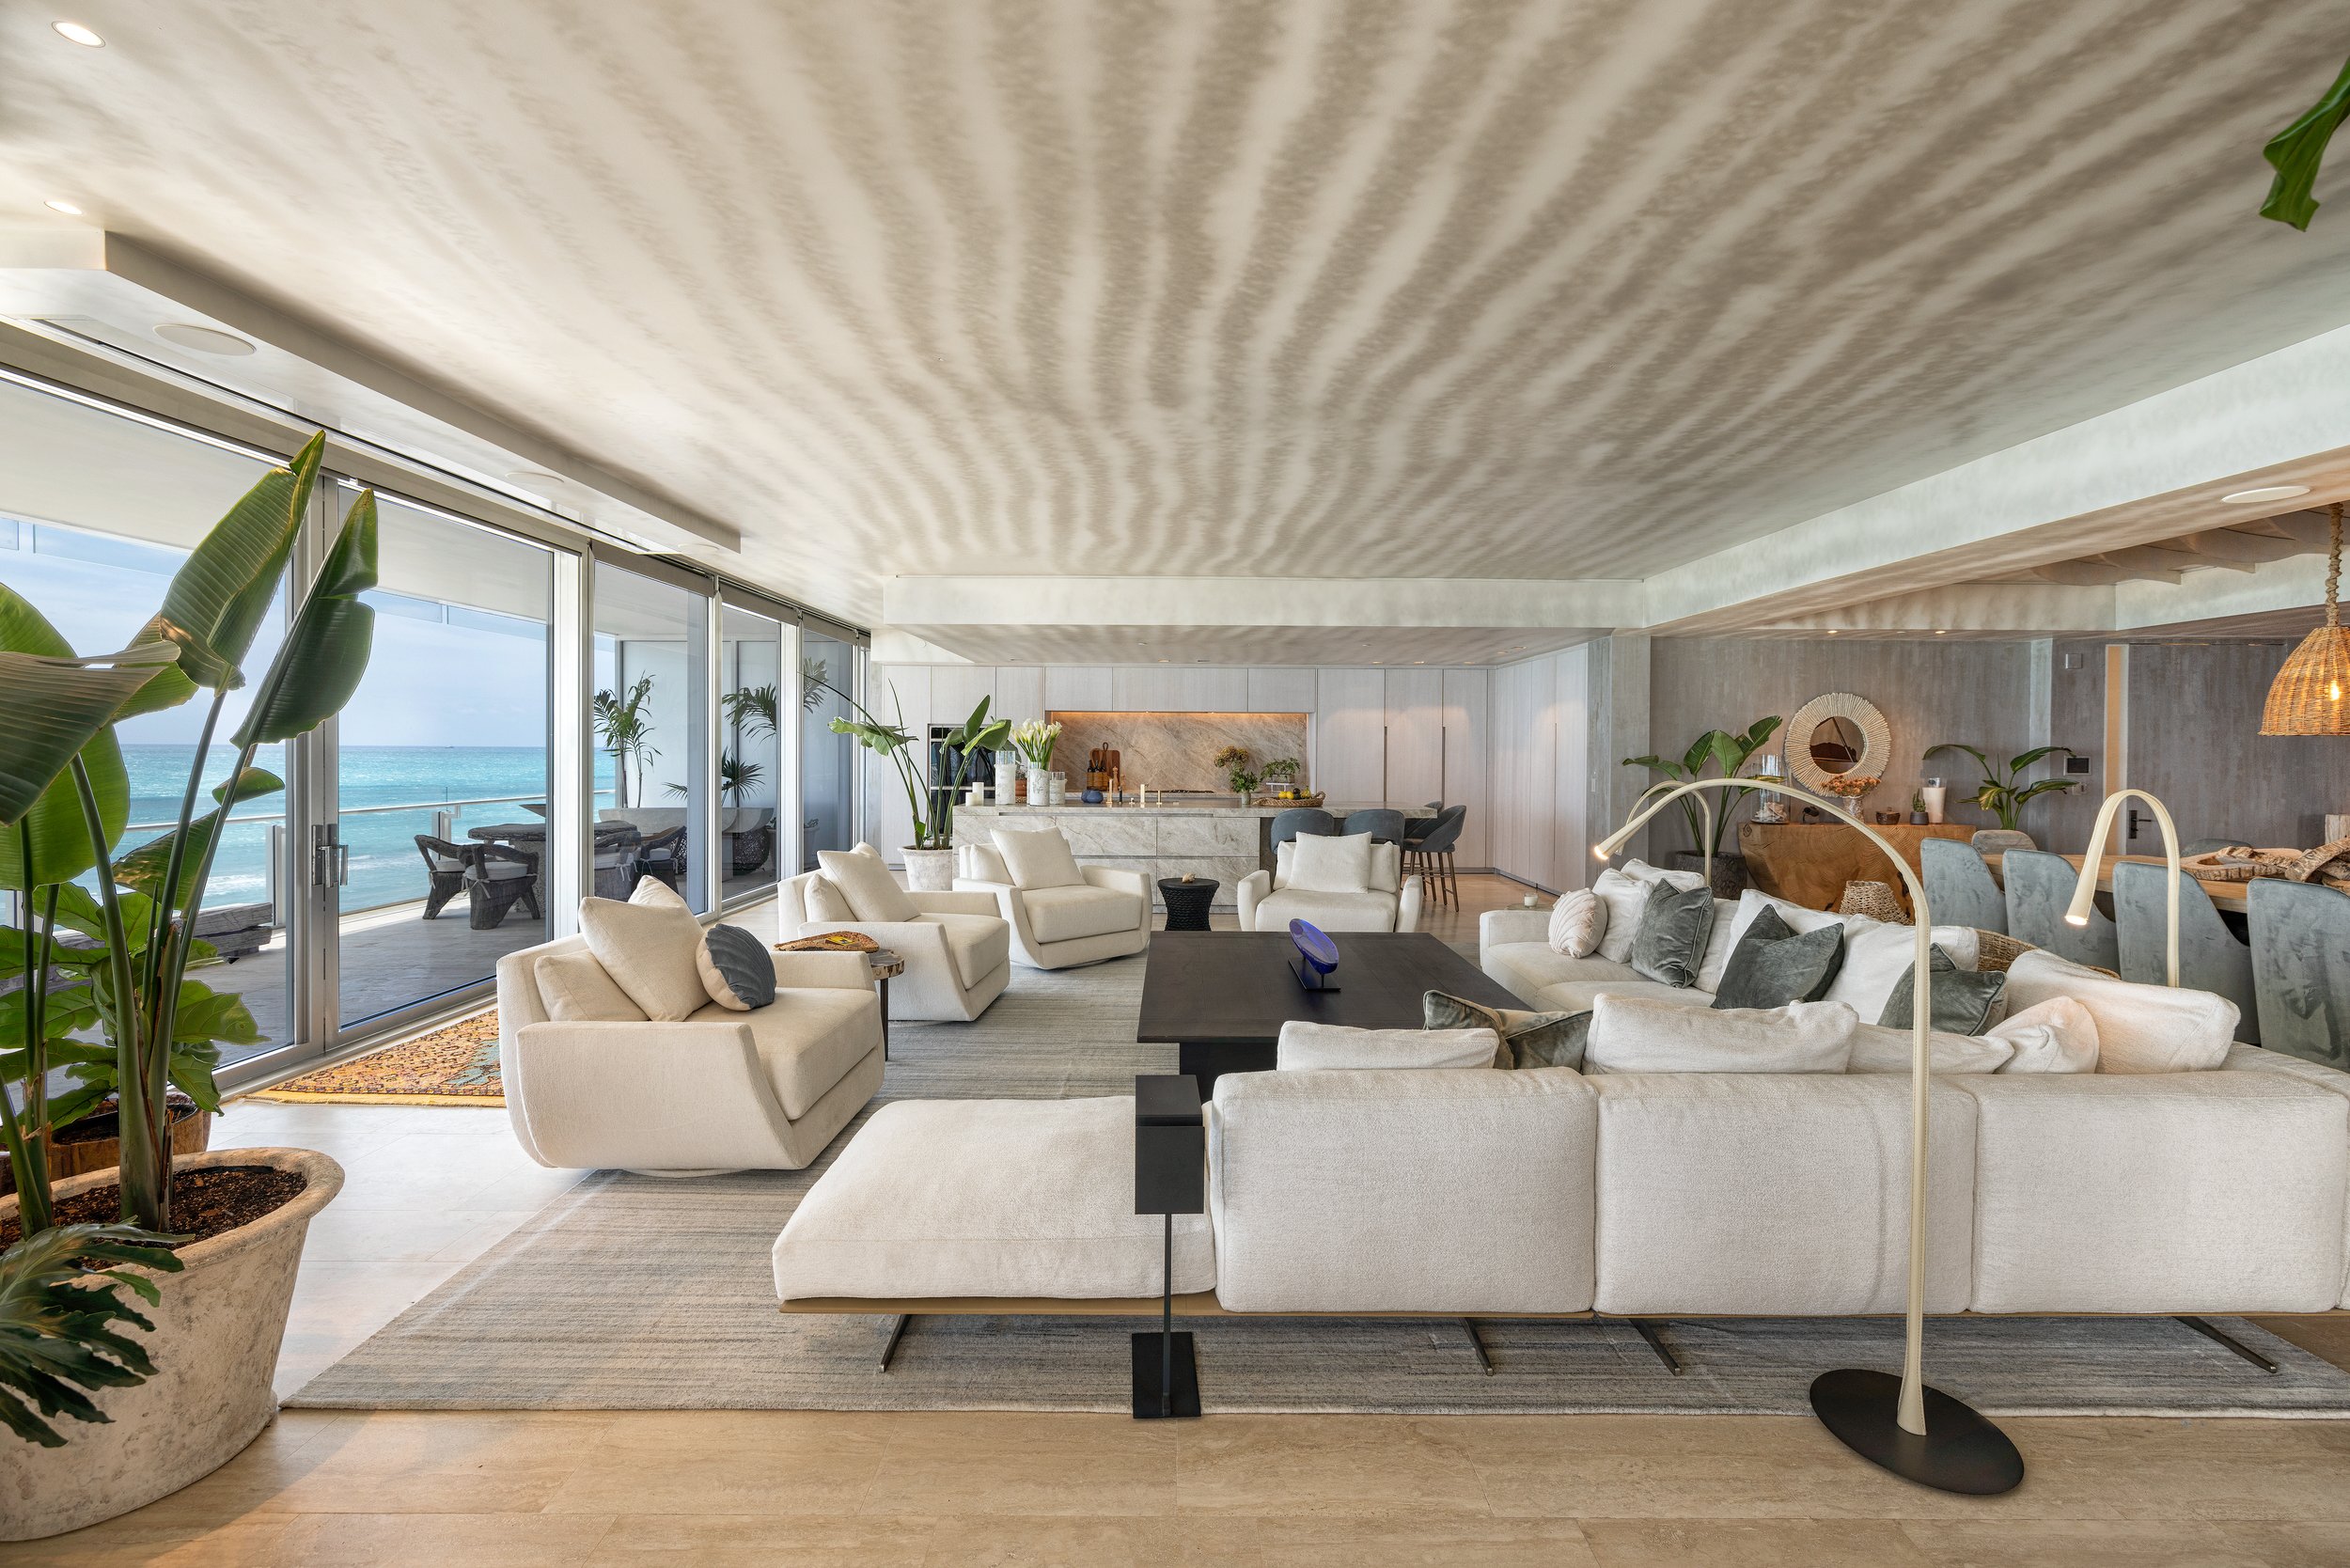 Check Out This Lavish Condo With Custom Wave Ceilings Asking $37 Million At Four Seasons at The Surf Club In Surfside 12.jpg